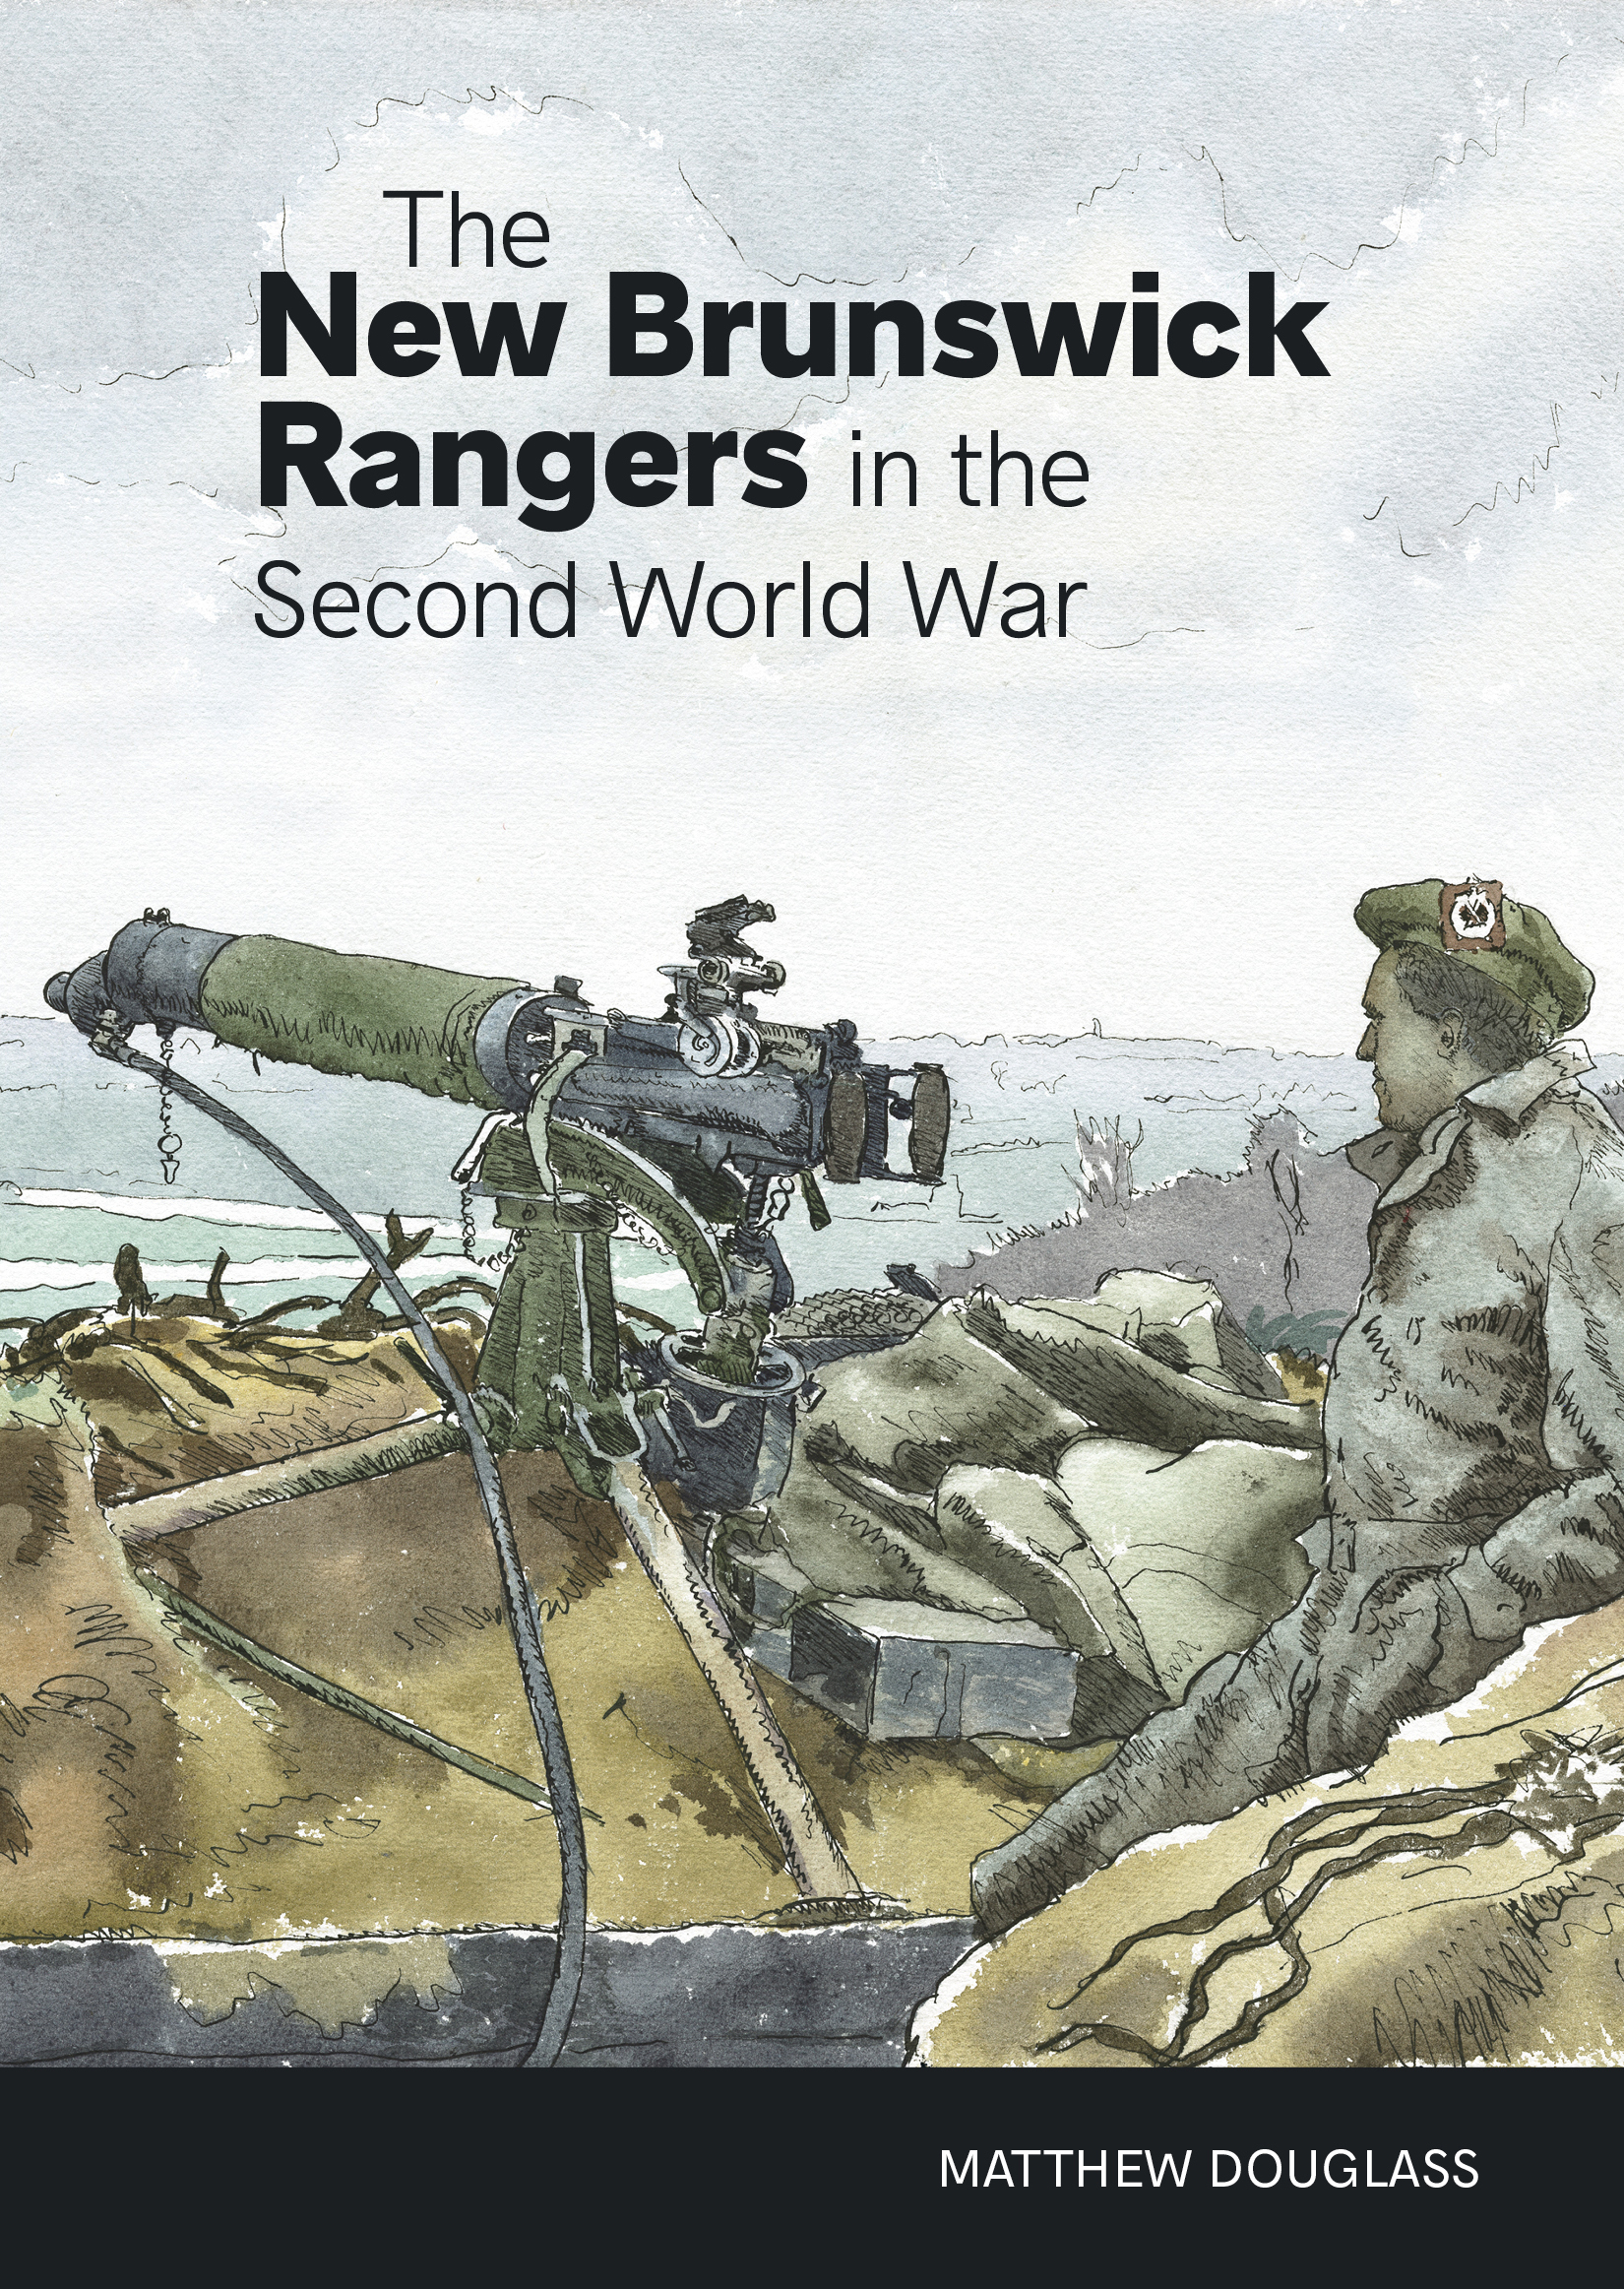 The New Brunswick Rangers in the Second World War